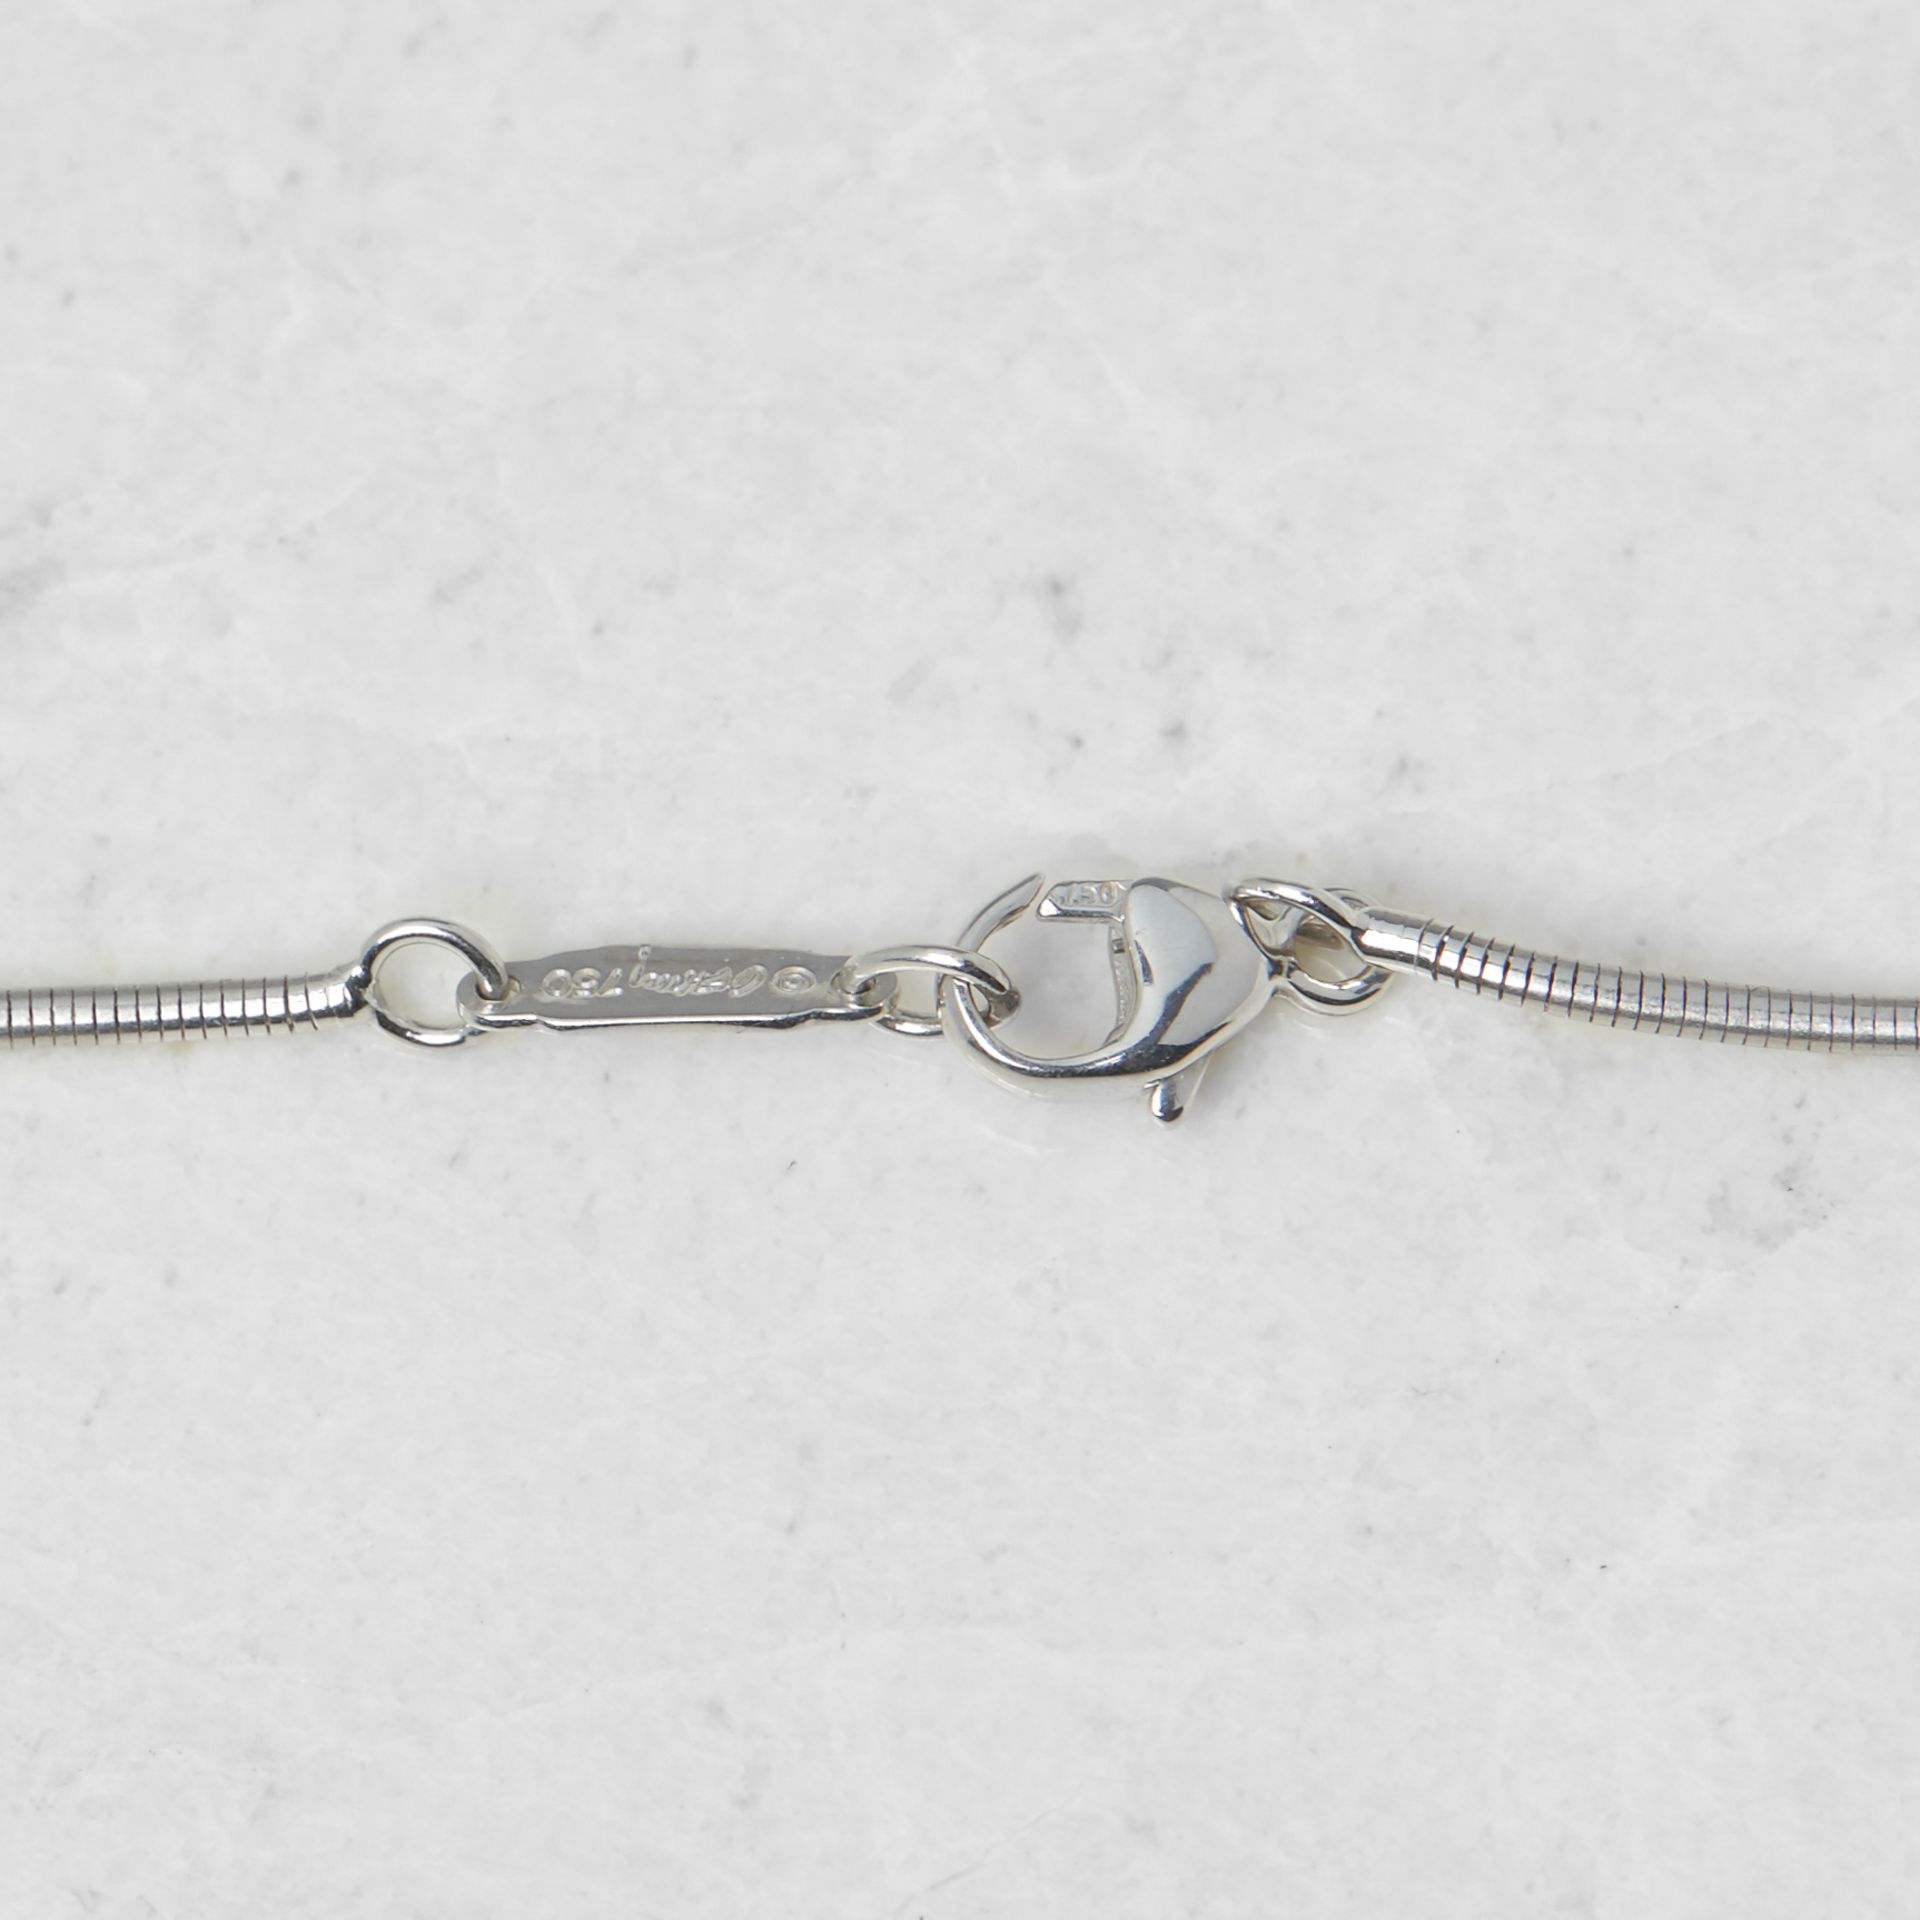 Tiffany & Co. 18k White Gold 0.60ct Diamond Frank Gehry Torque Necklace - Image 3 of 8